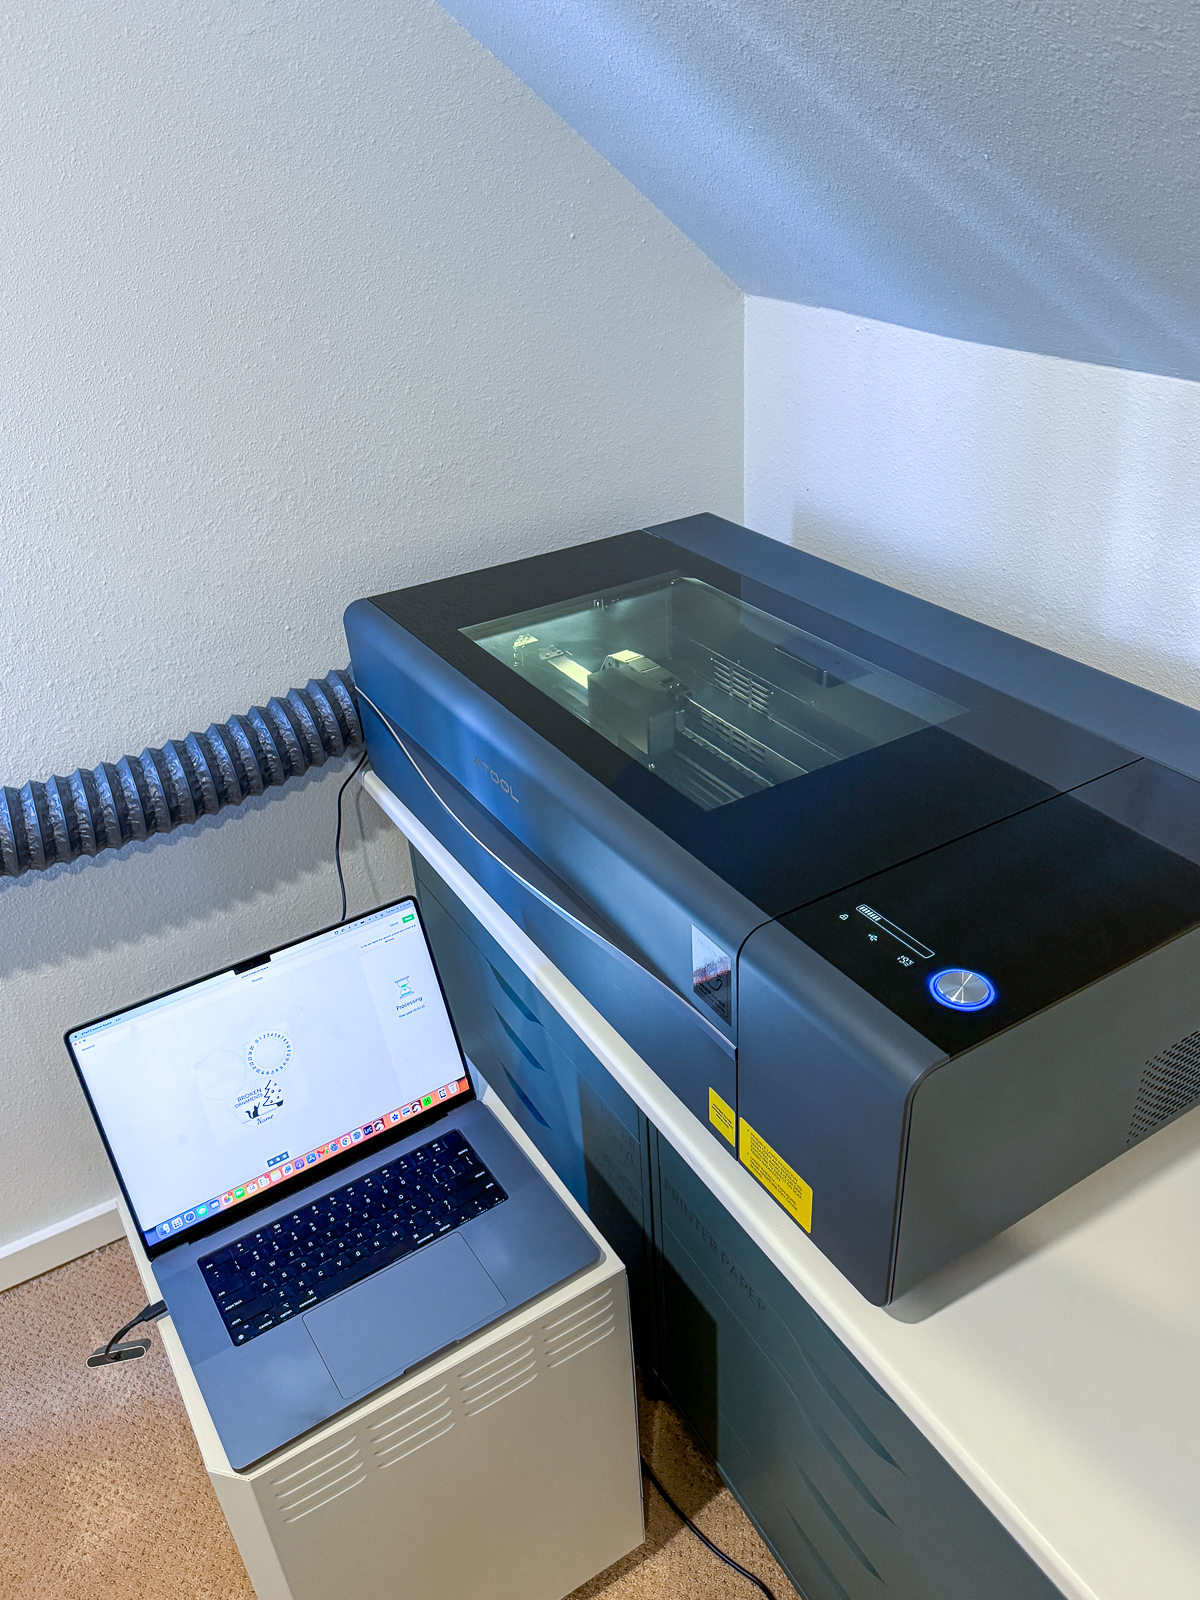 xTool P2 laser cutter set up in craft room